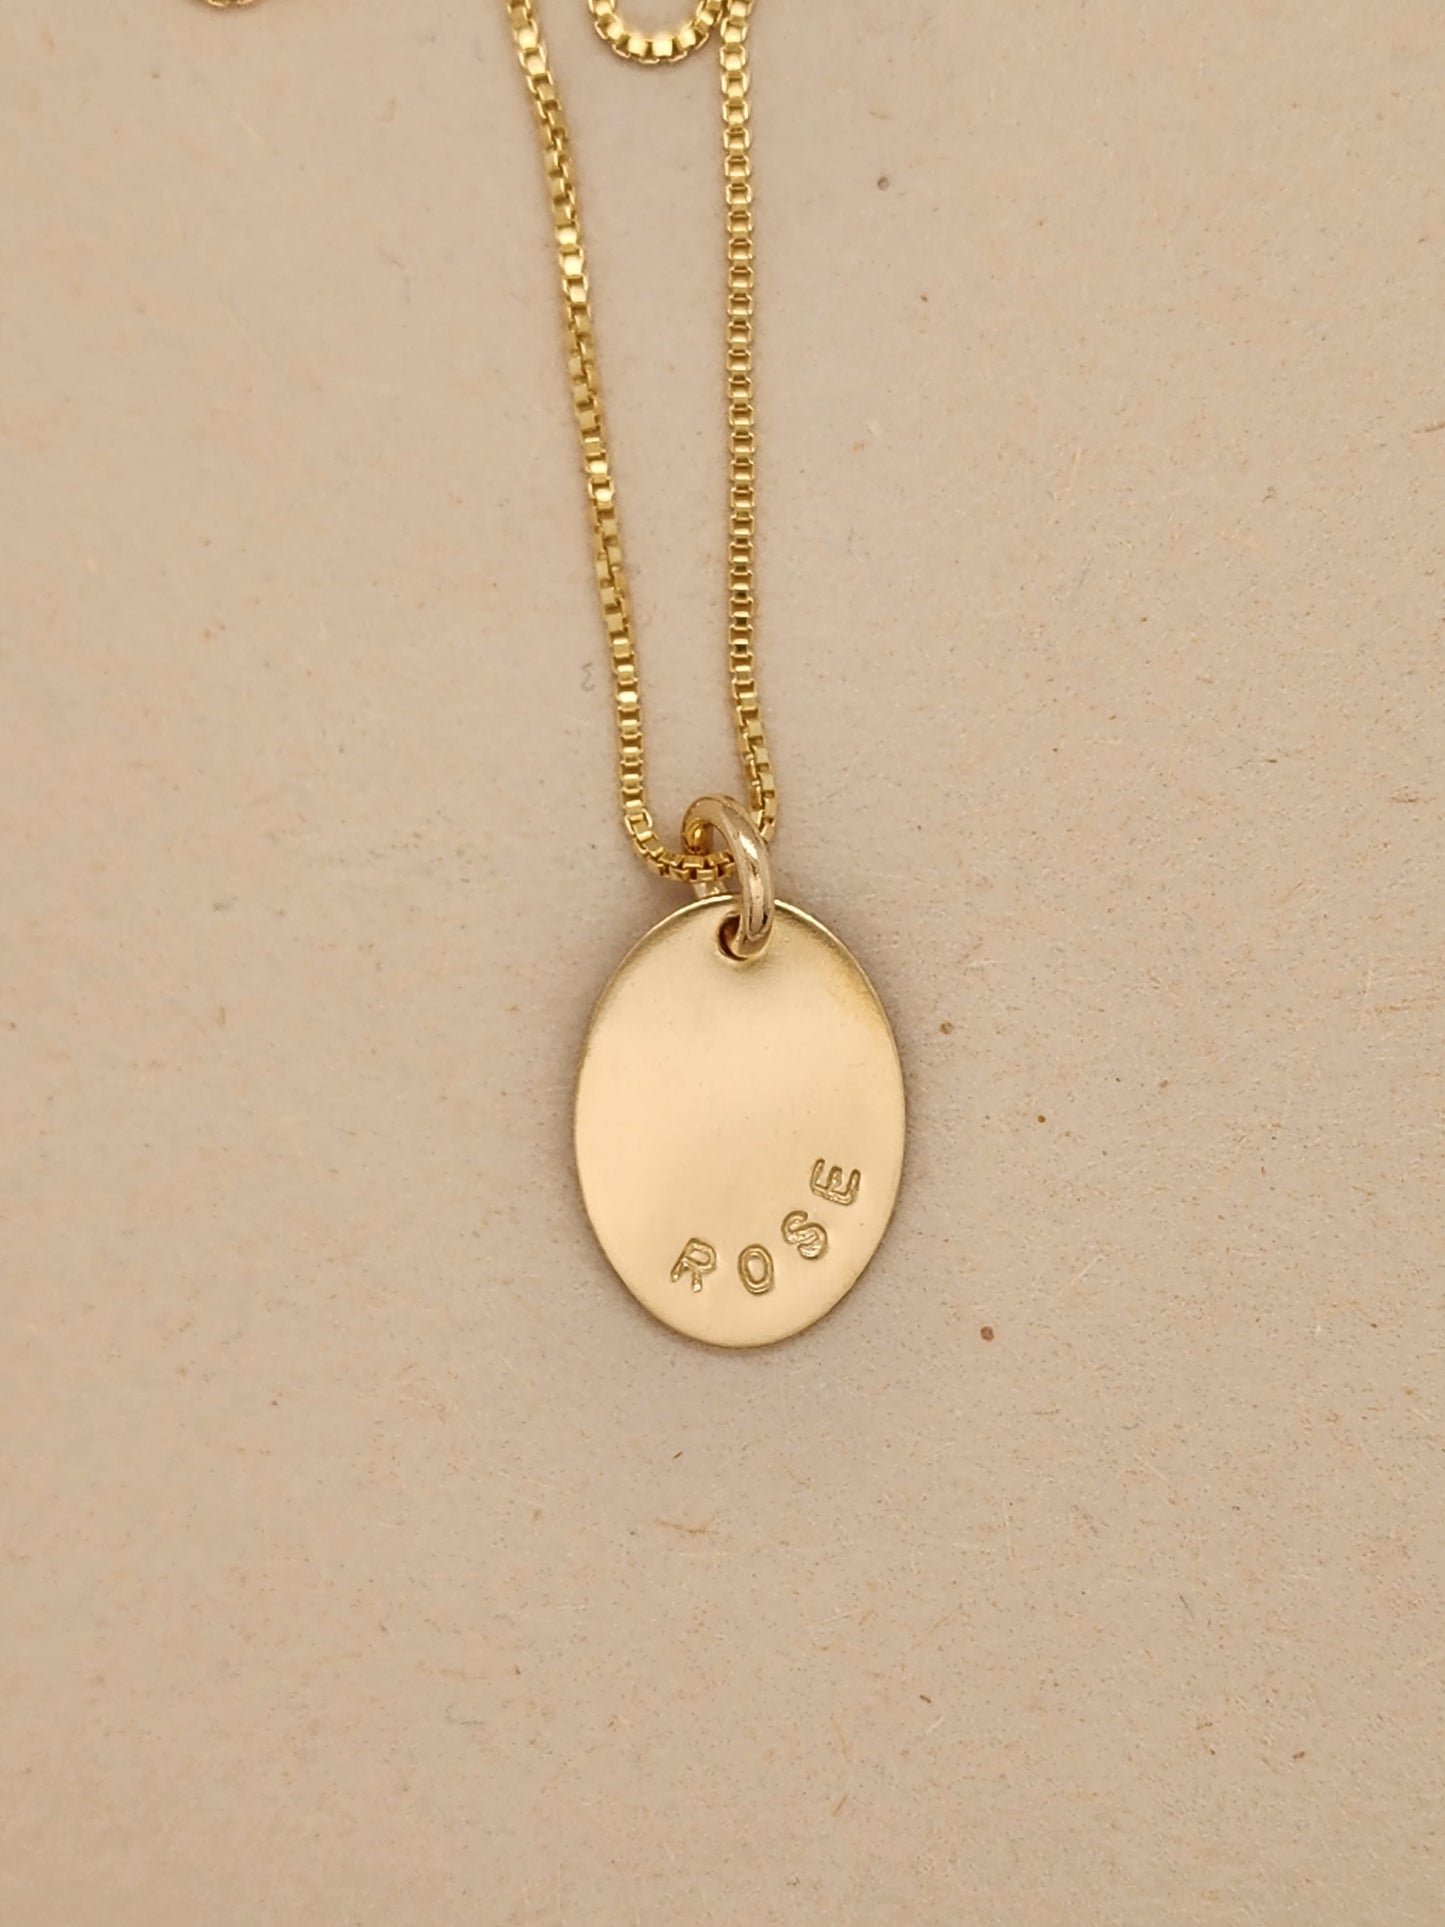 Oval Name Necklace - Going Golden